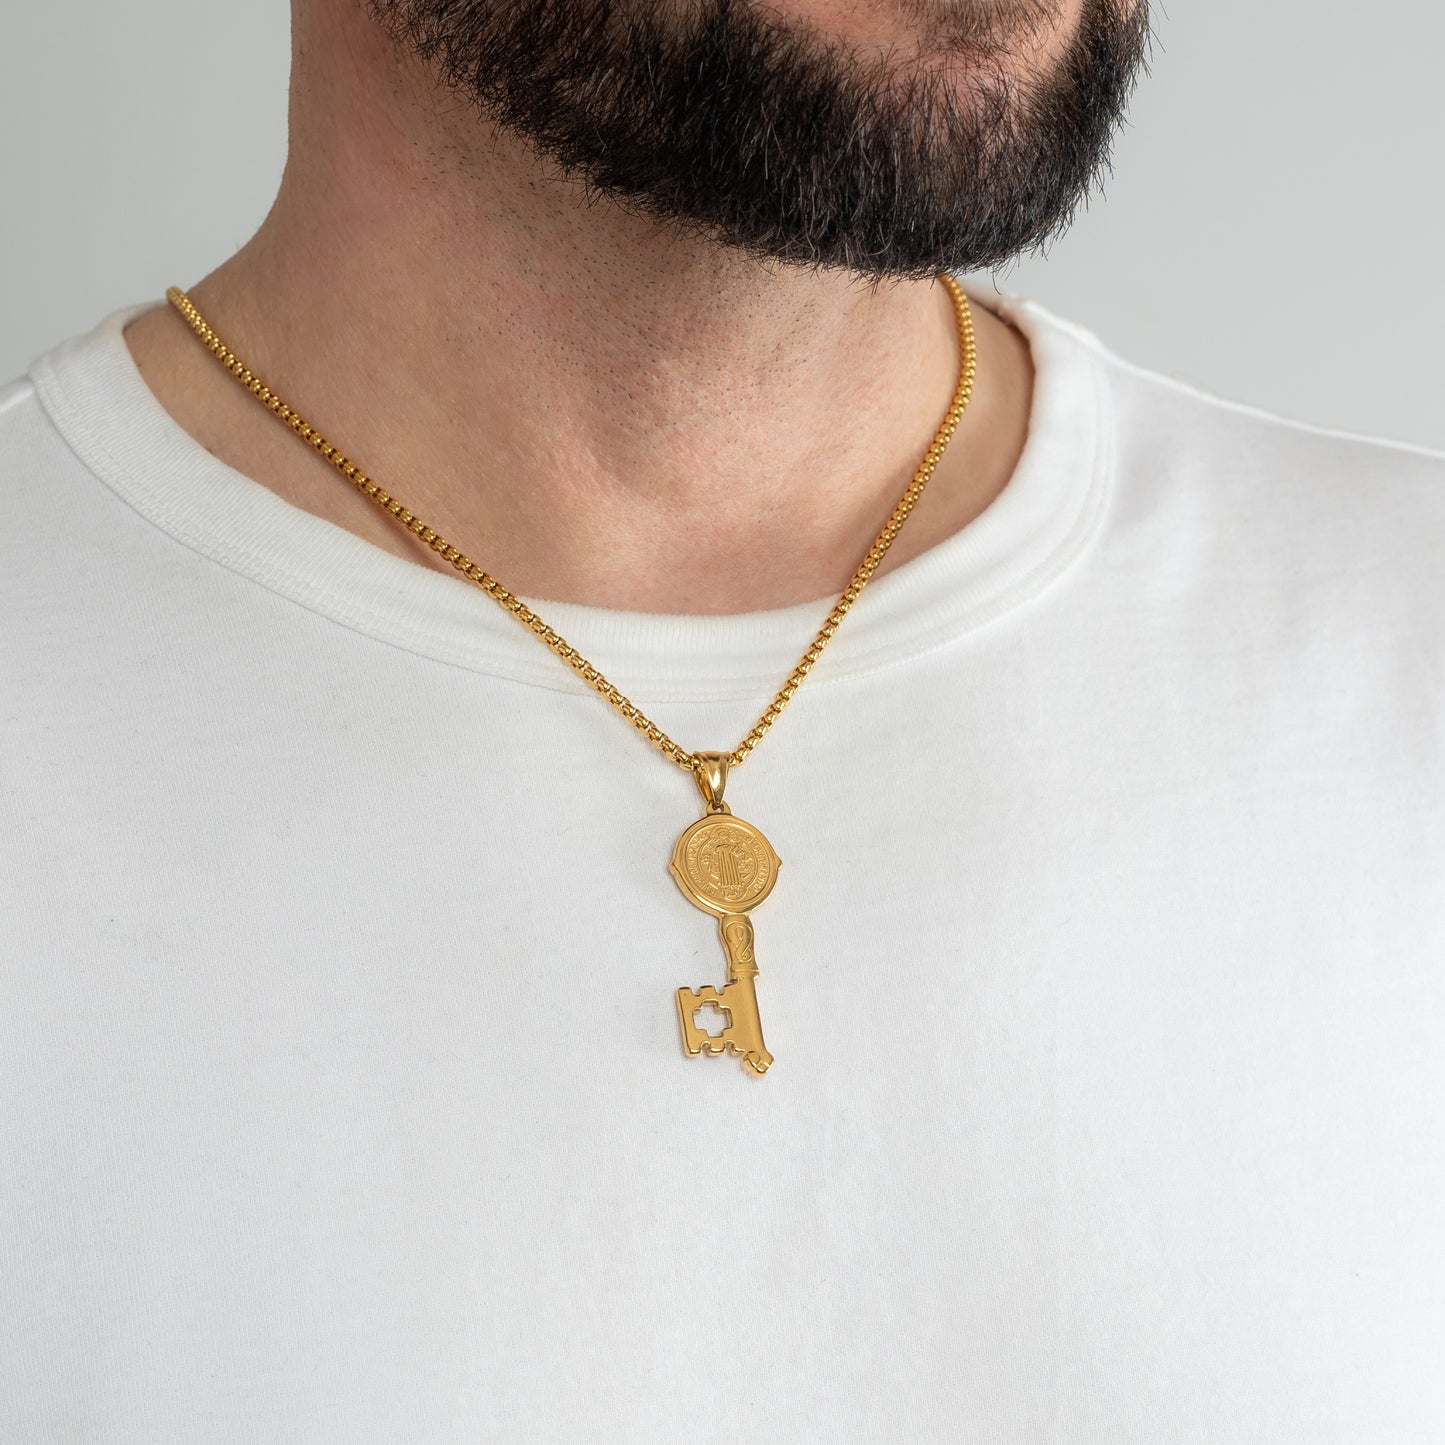 A male model in a white t-shirt wearing a St. Benedict Key Gold Pendant with a 3mm Gold Round Box link chain 22 inches. Close-up image of the non-tarnish trending men's necklace.